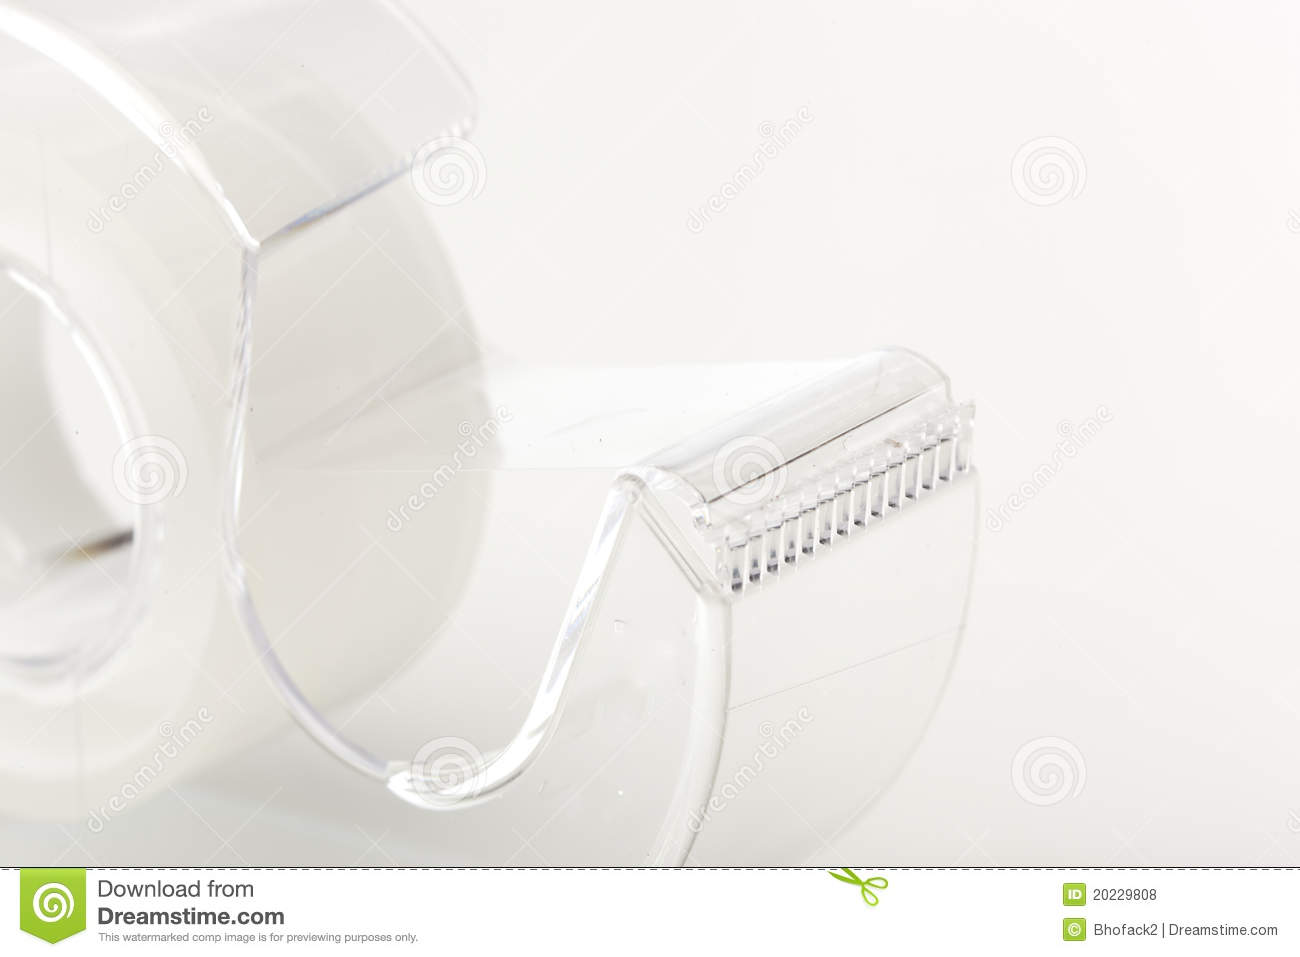 Clear Tape Dispenser Royalty Free Stock Photos   Image  20229808